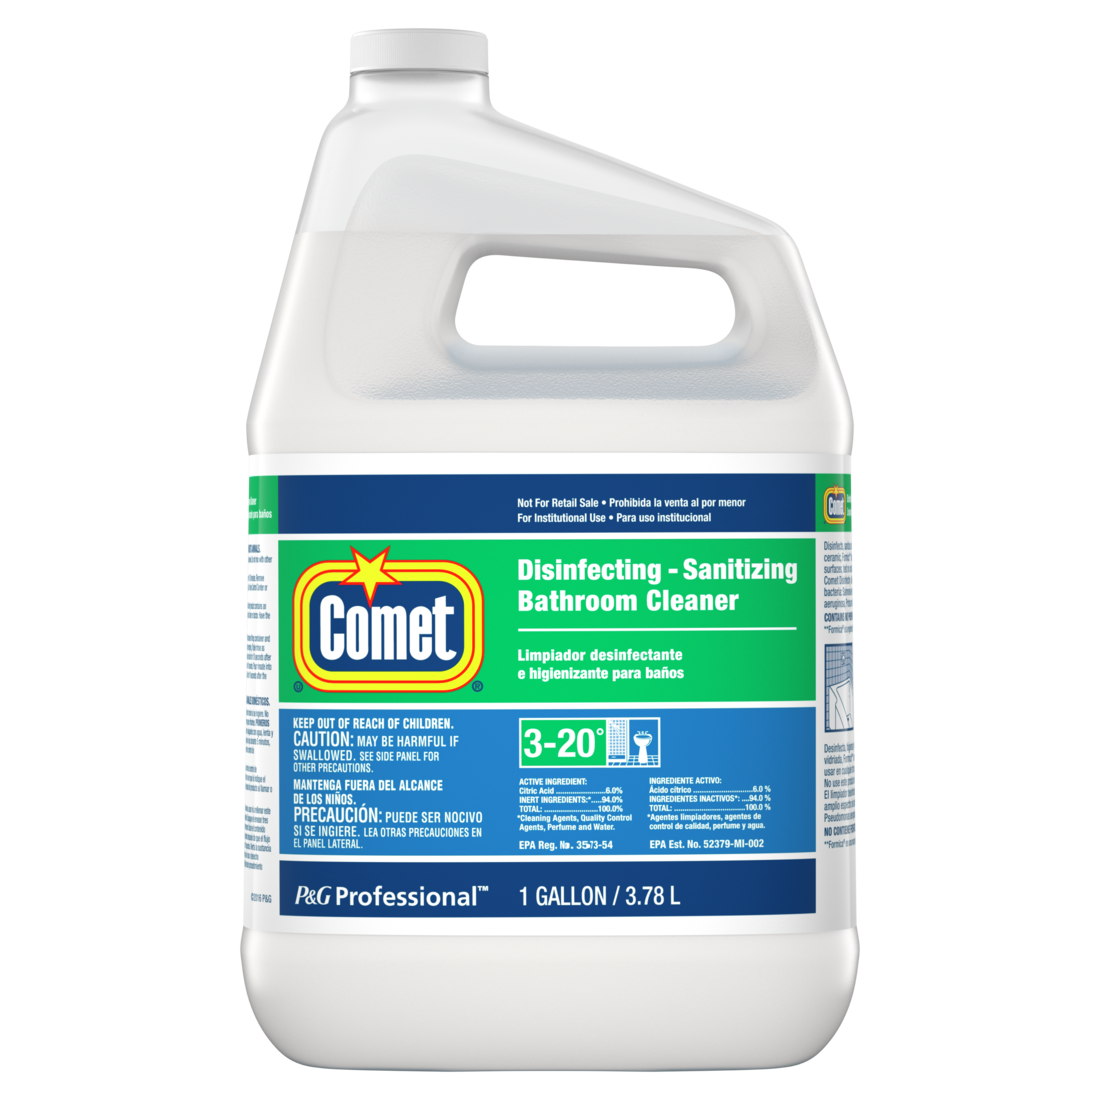 Comet Bathroom Cleaner And Disinfectant, How To Use Comet To Clean Bathtub